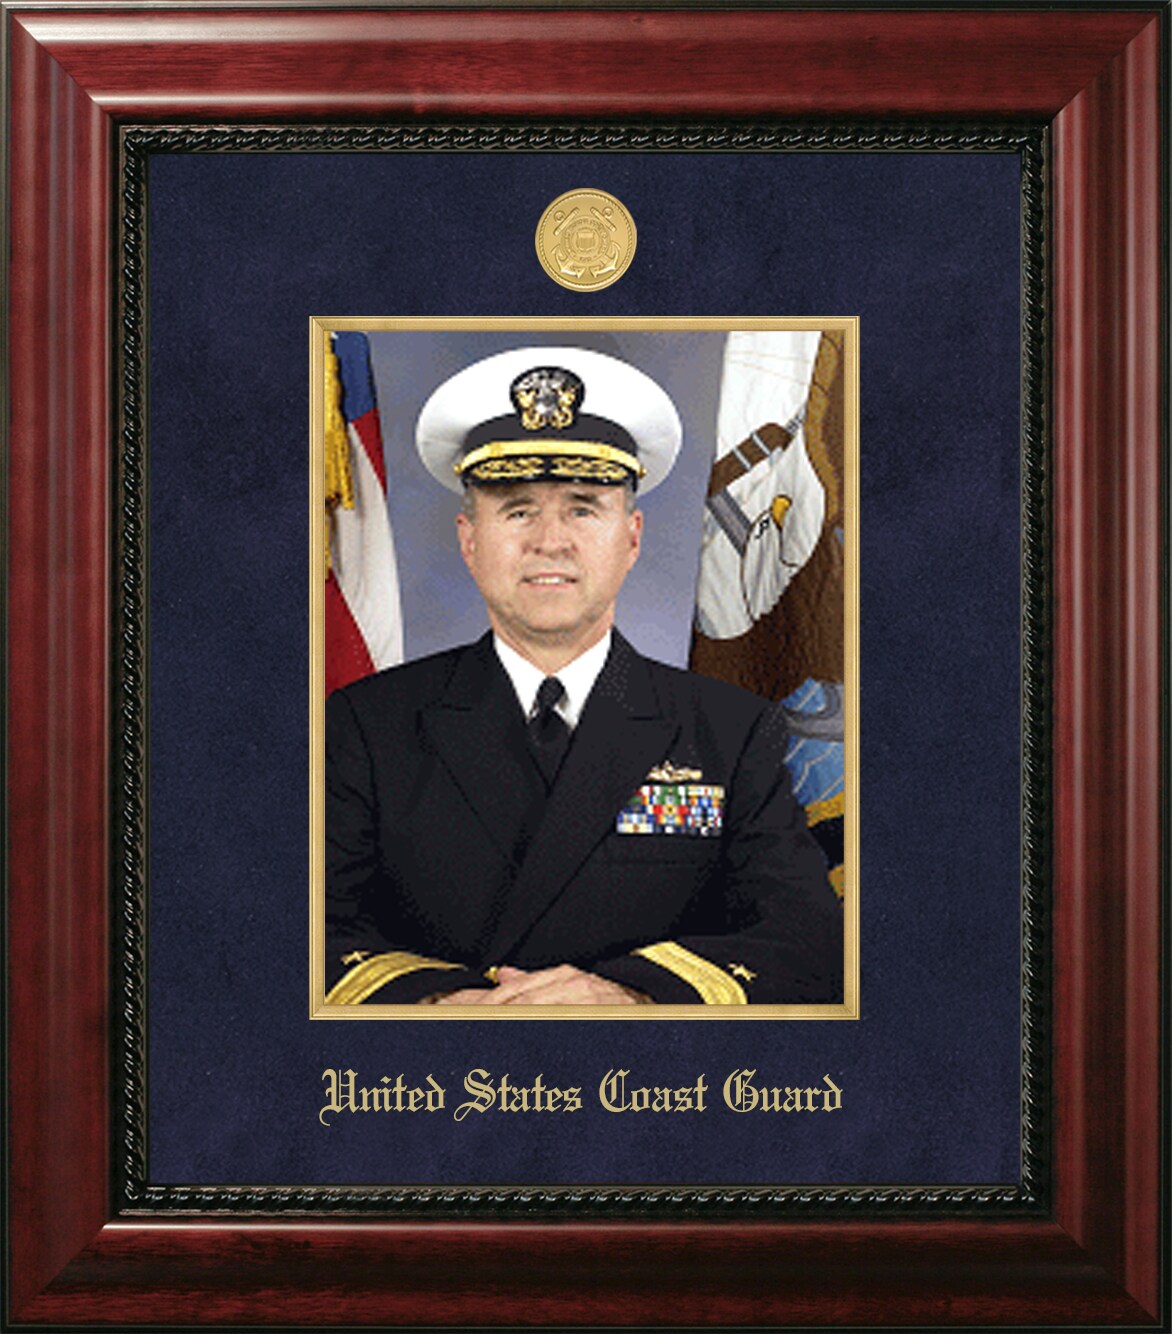 Patriot Frames Coast Guard 8x10 Portrait Executive Frame with Gold Medallion and gold Filet